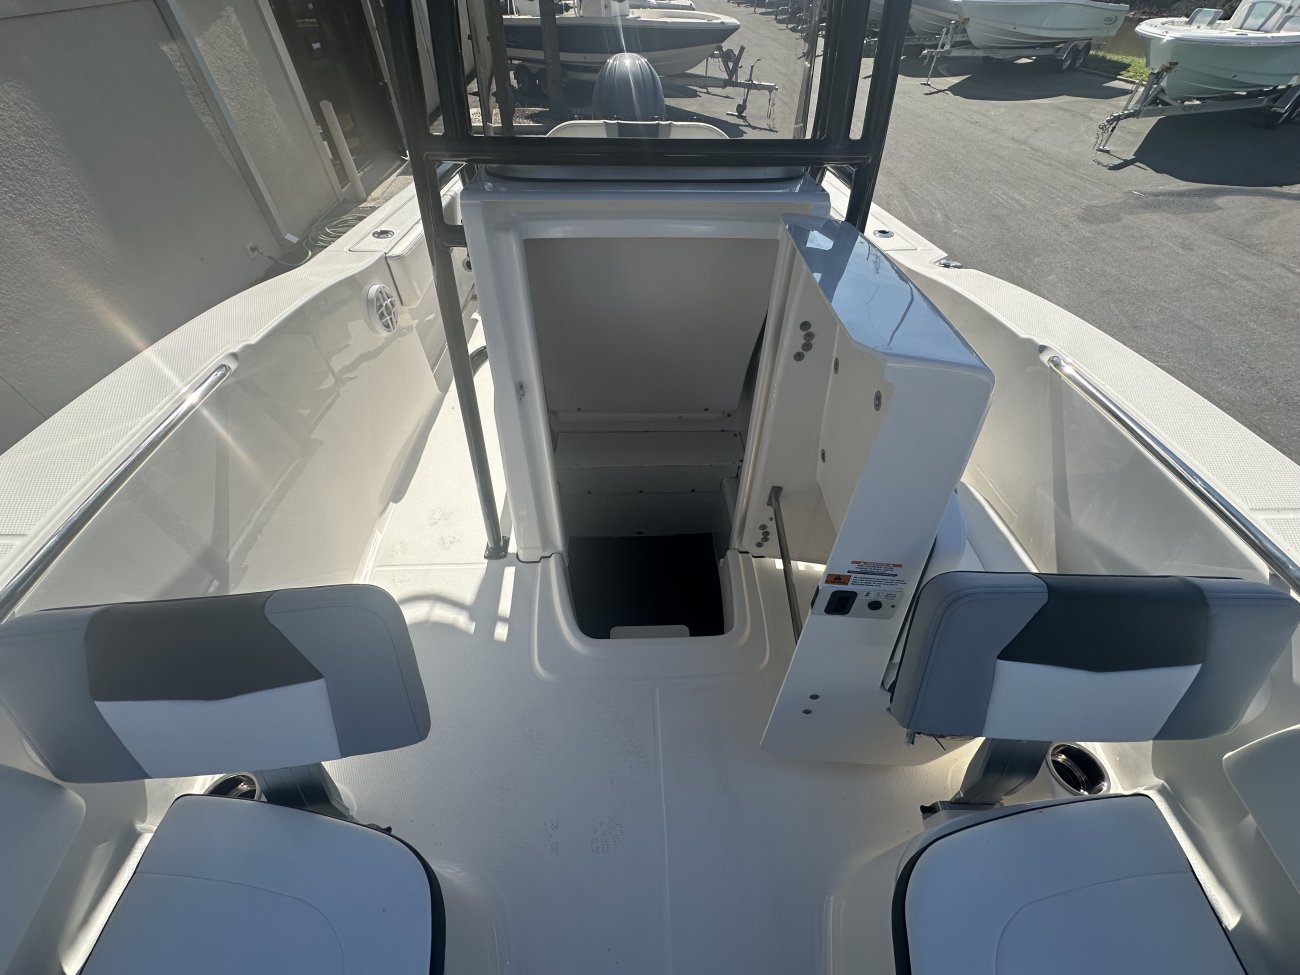 A R200 Center Console is a Power and could be classed as a Center Console, Freshwater Fishing, High Performance, Saltwater Fishing, Runabout,  or, just an overall Great Boat!